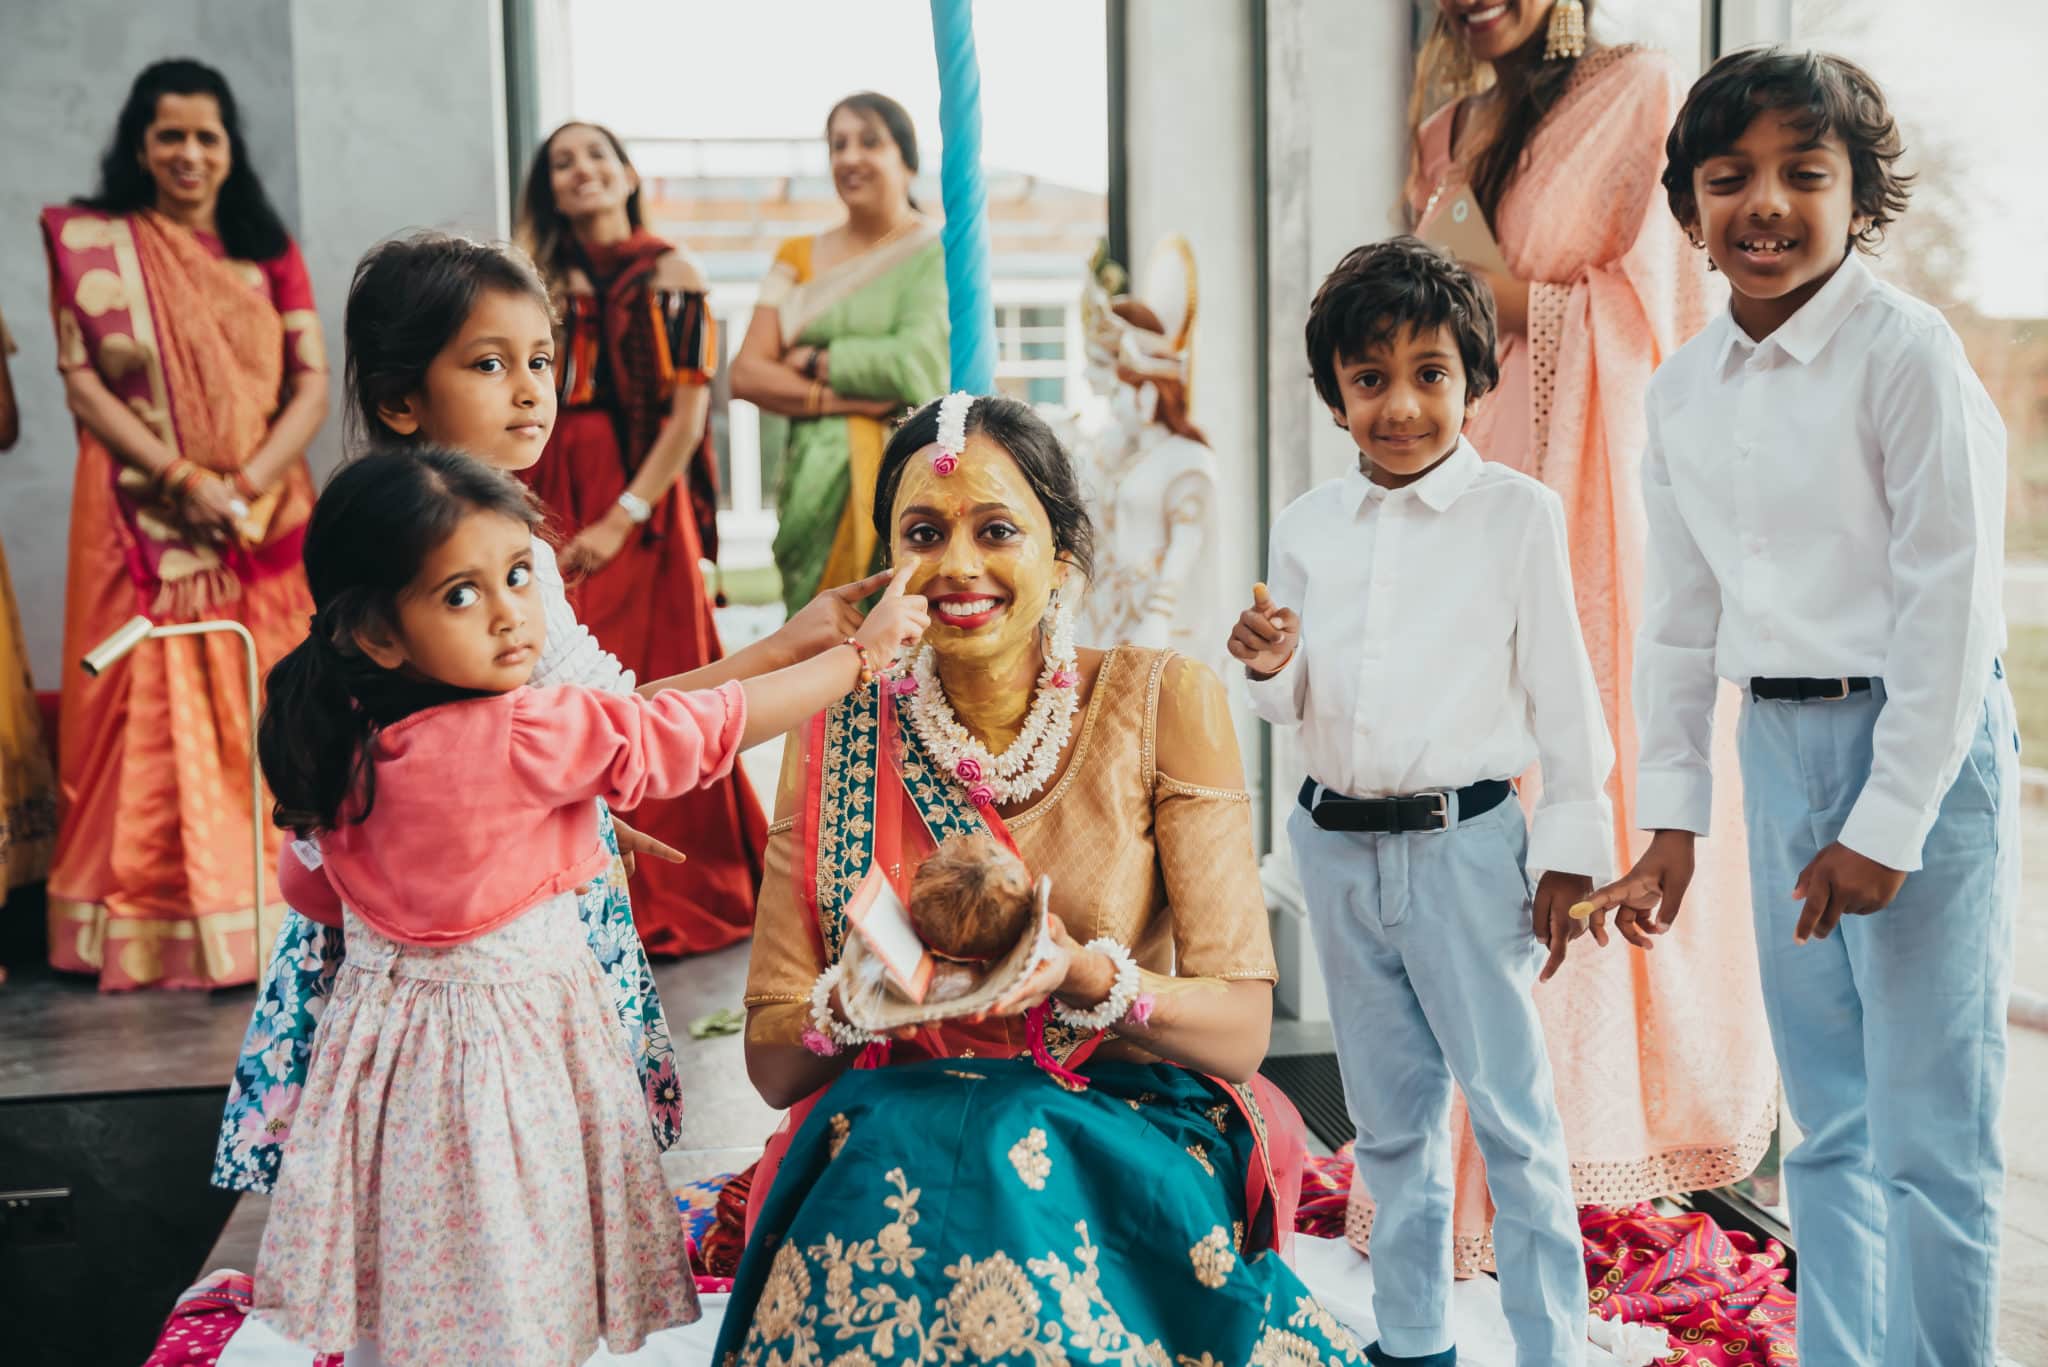 Pithi ceremony in an Indian wedding ceremony, Barnet, Potters Bar London